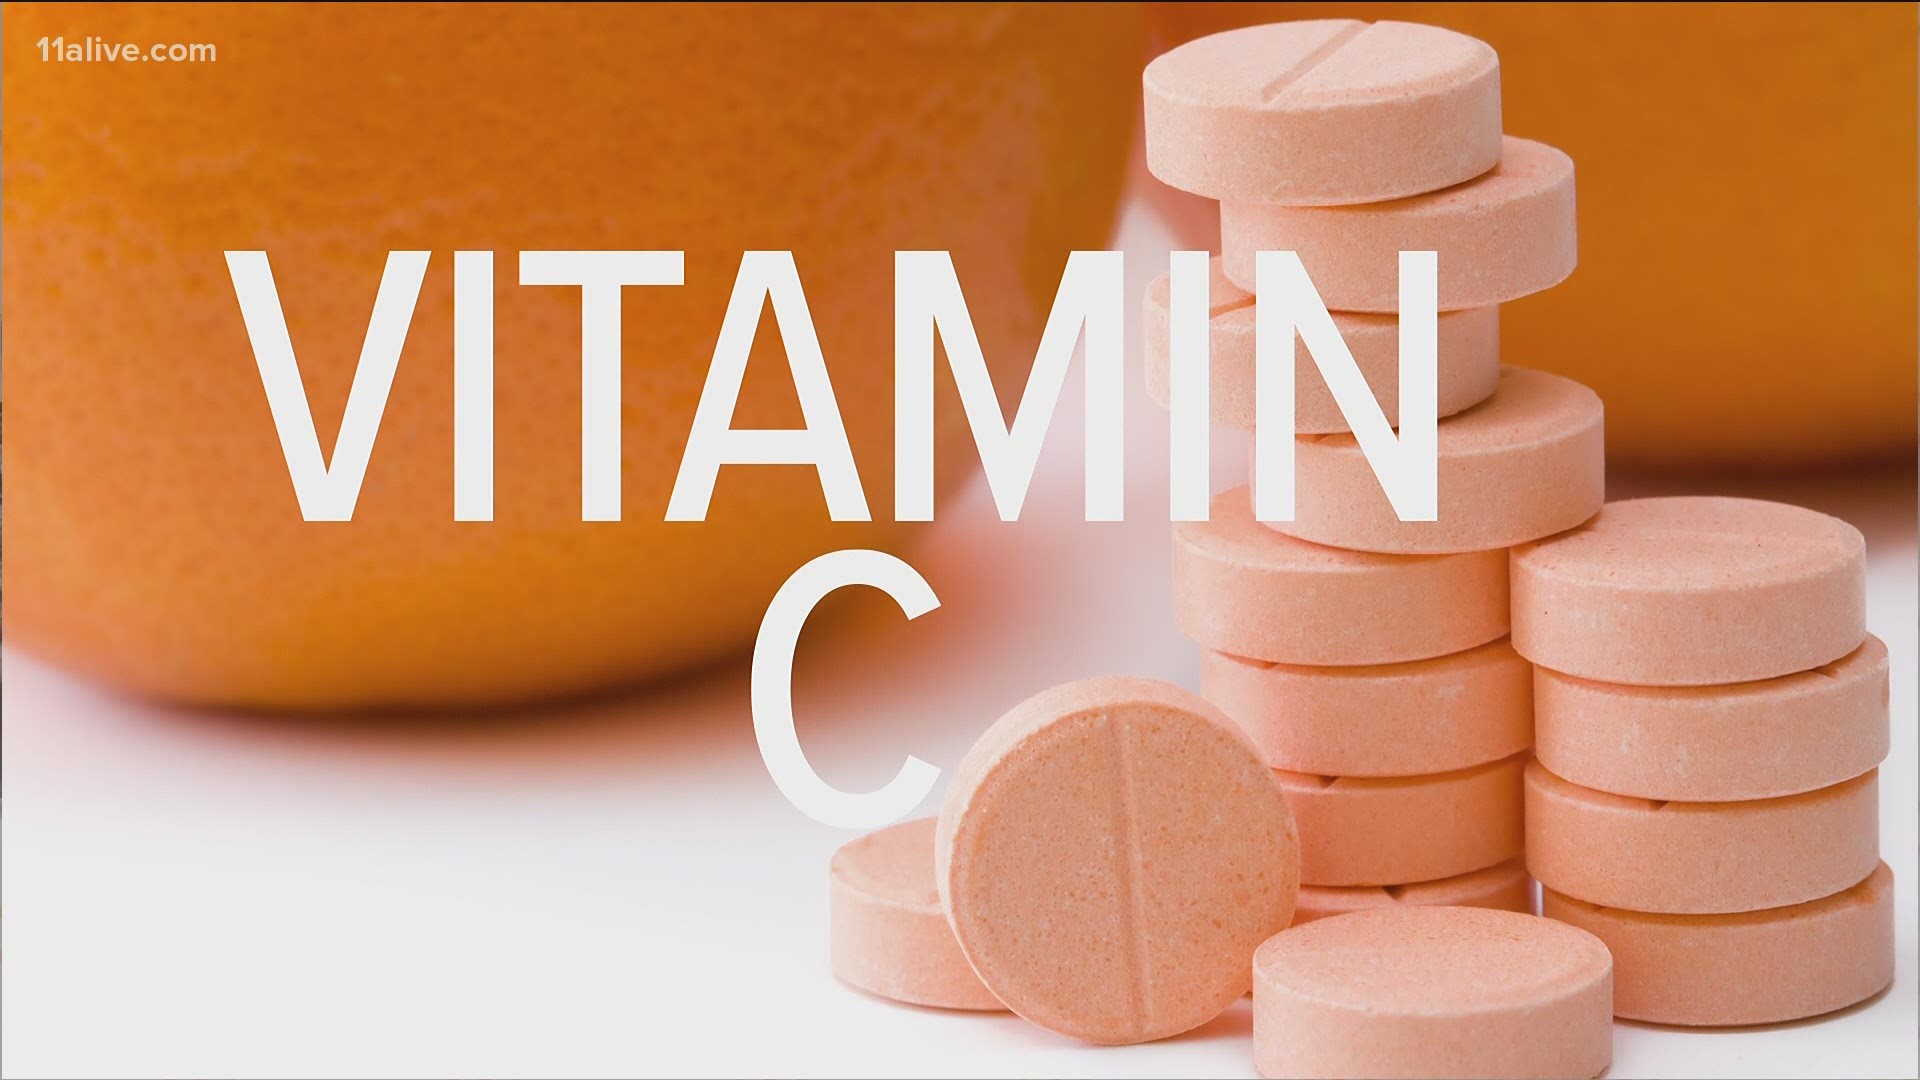 There is no evidence that Vitamin C will help prevent you from getting COVID-19.